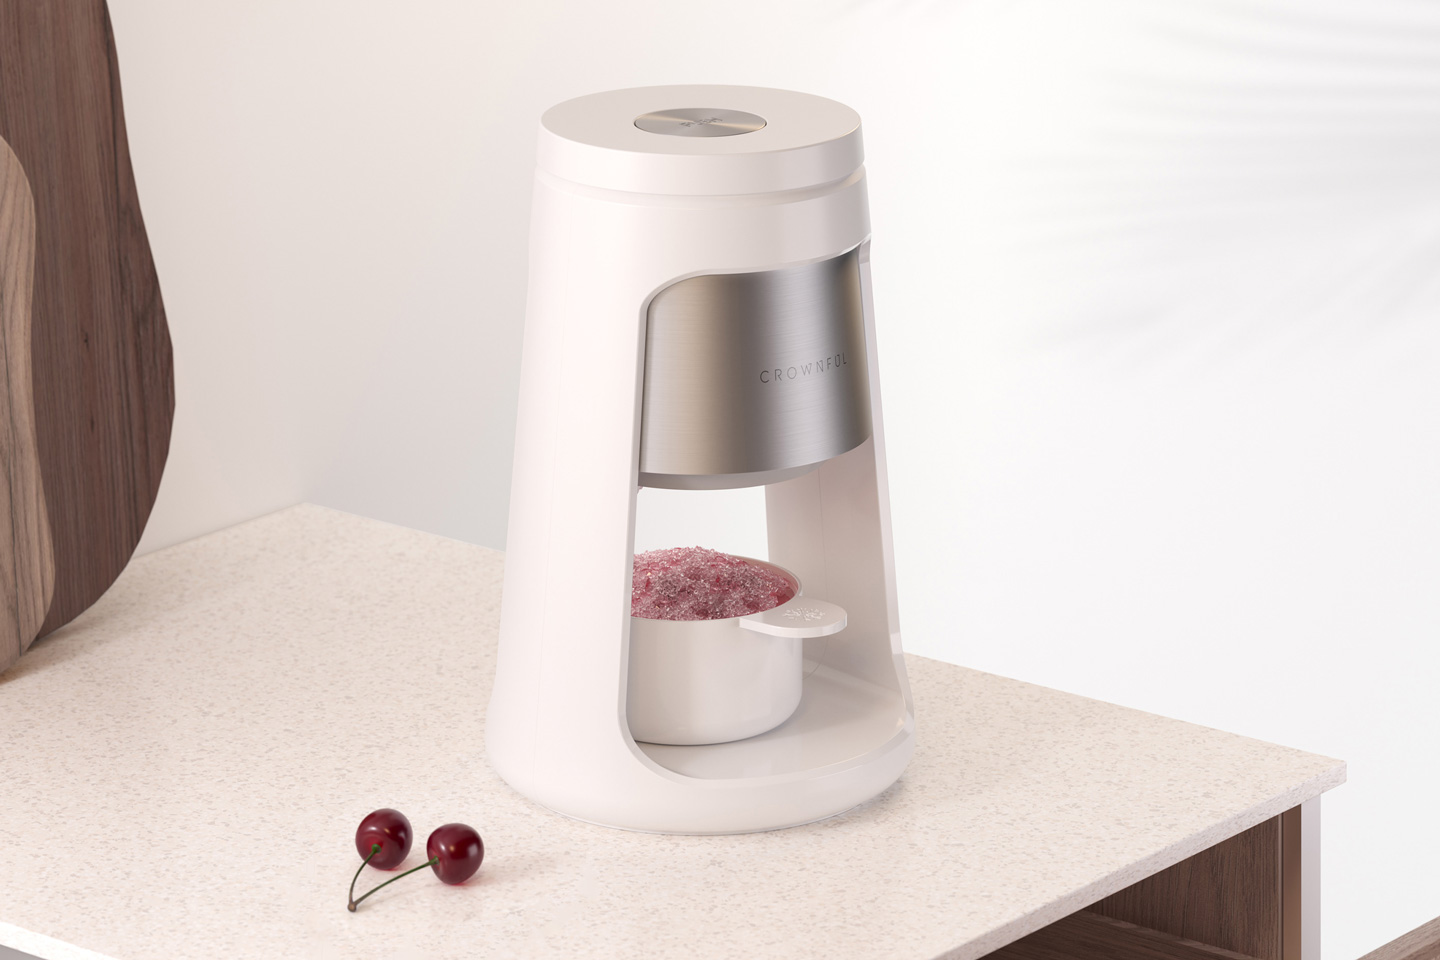 #This Keurig-style appliance dispenses shaved-ice desserts and slushies on demand!